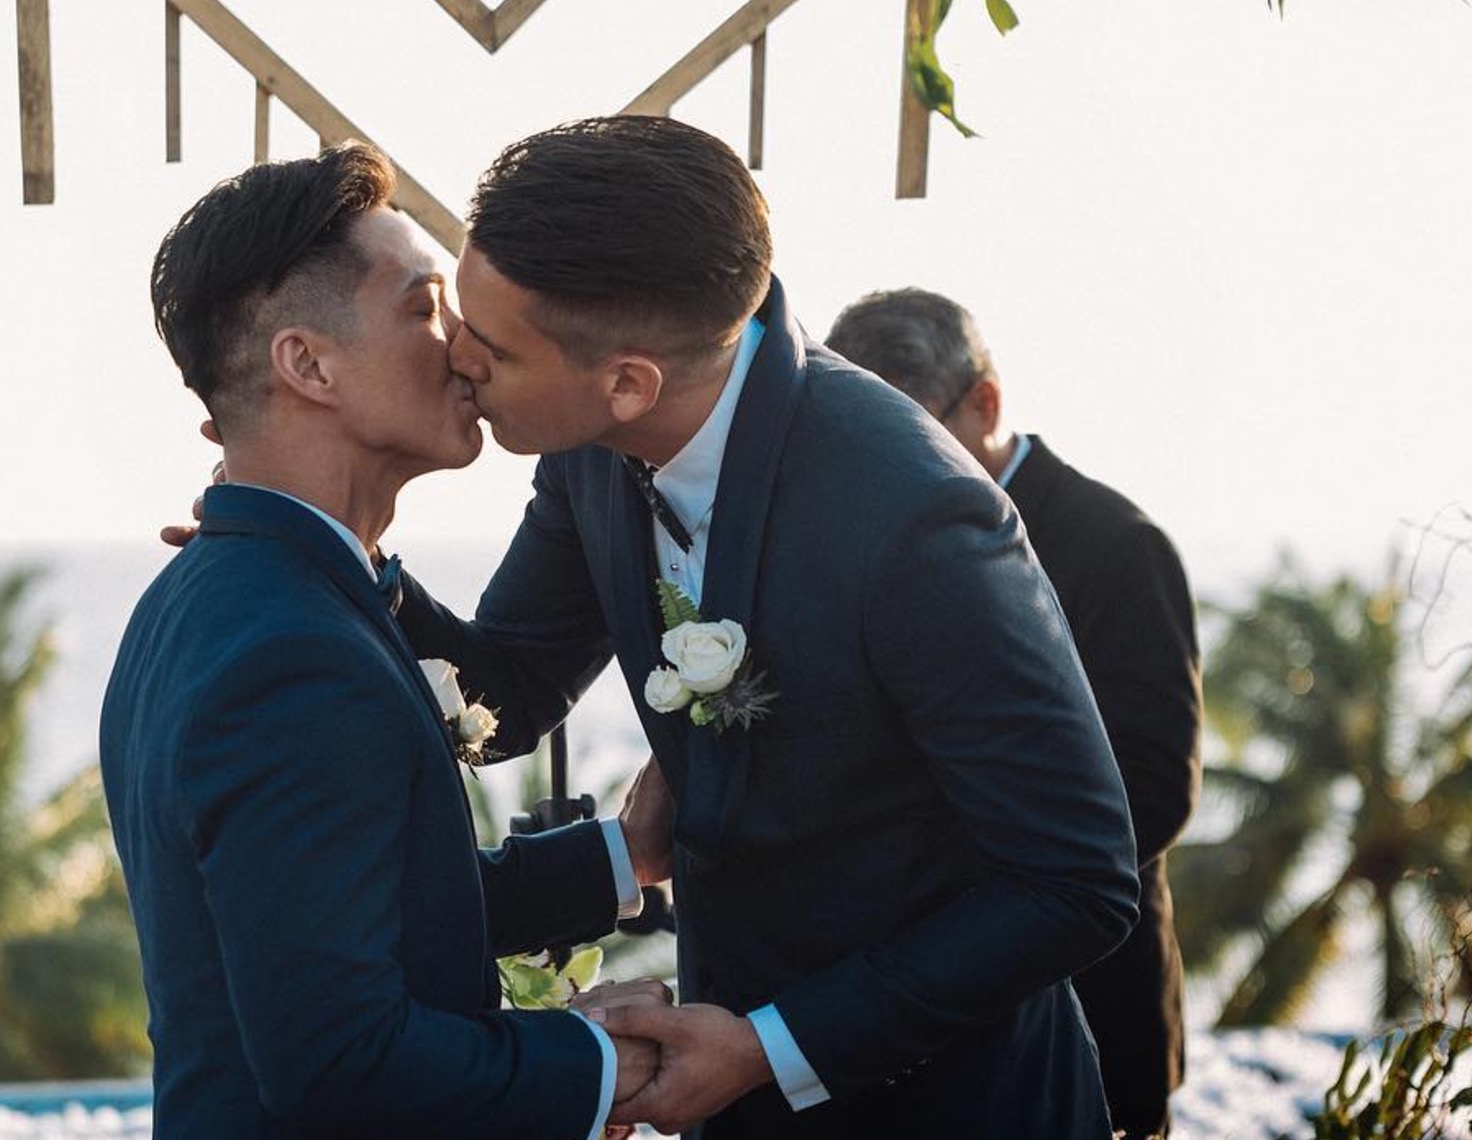 Francis Libiran and Christian Mark share kiss after exchanging vows in romantic Boracay ceremony. PHOTO: Instagram/Metro Photo